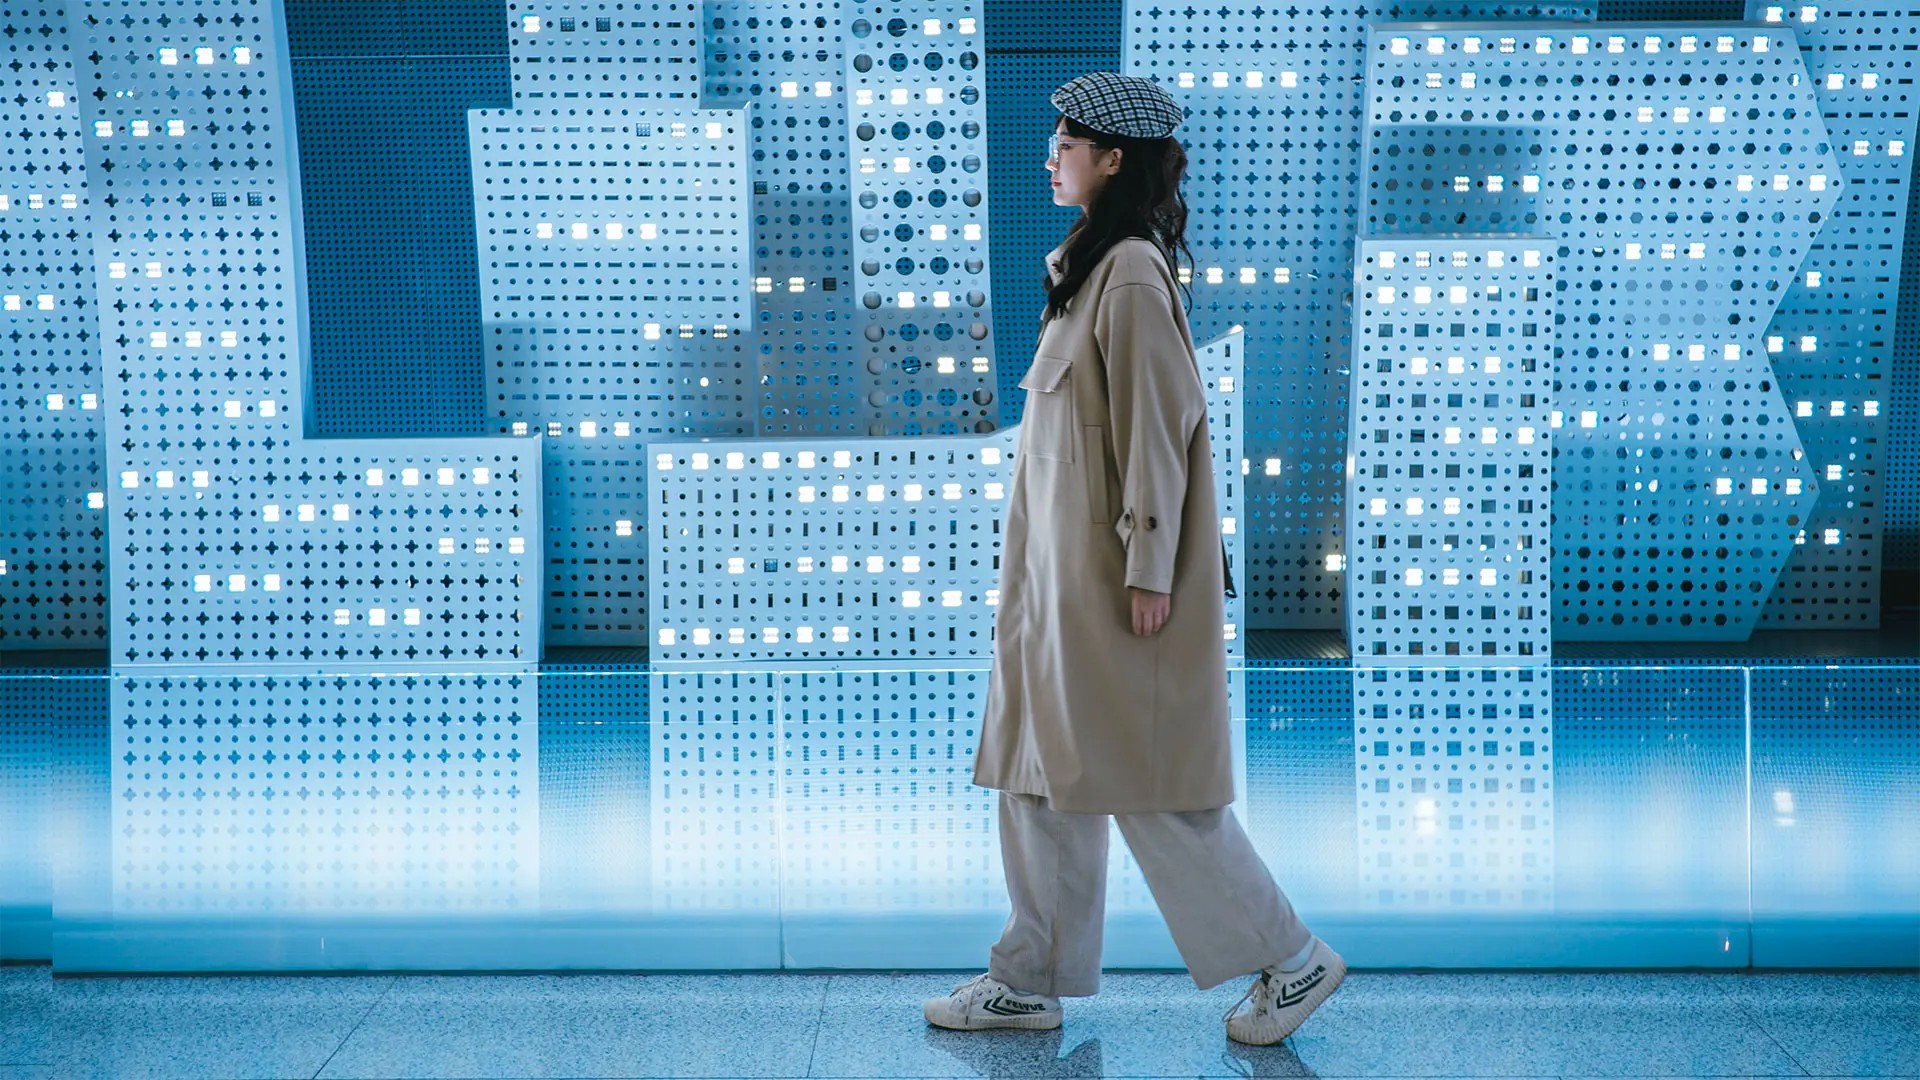 Woman walking in front of background of tiles with holes and lights reminiscent of skyscrapers